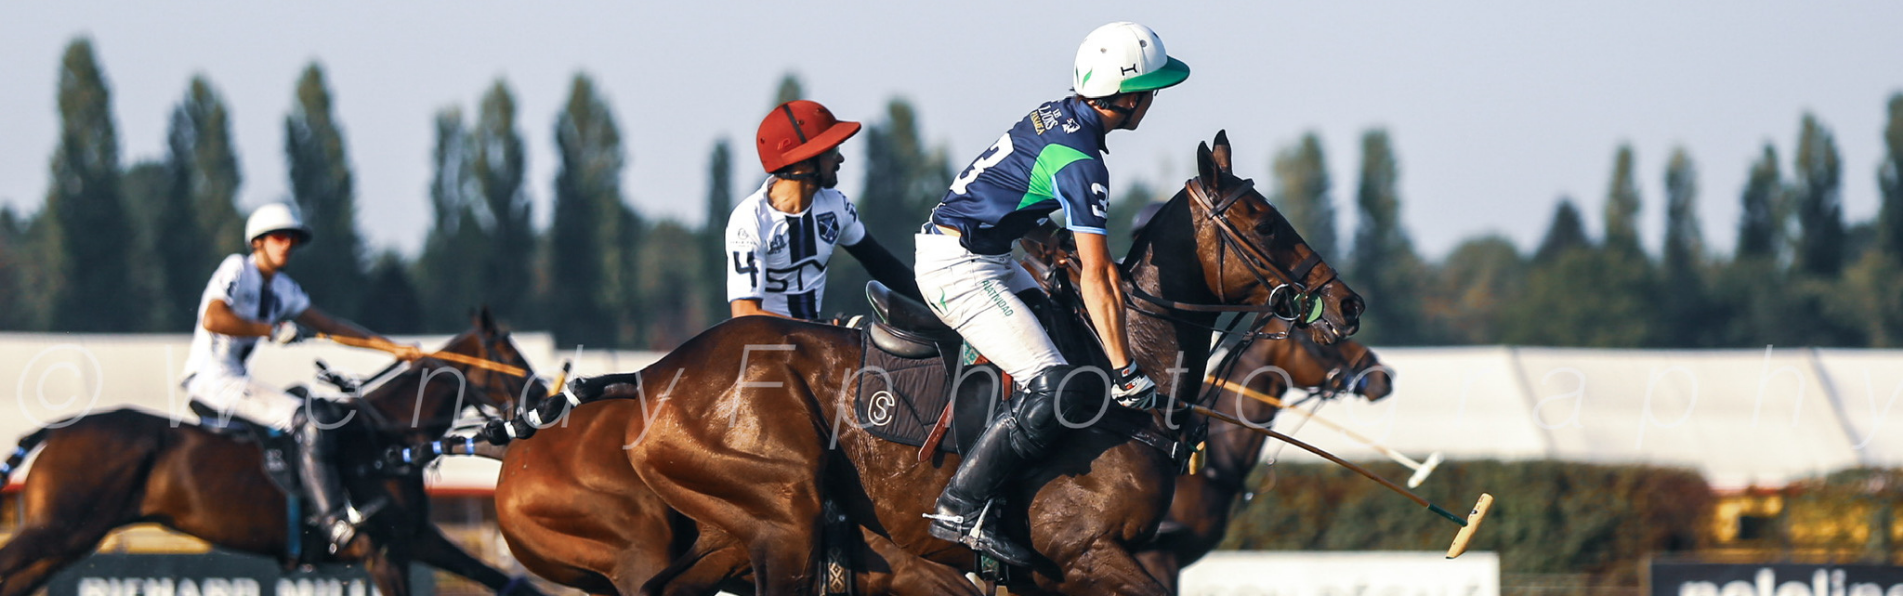 https://www.kronopolo.es/image/cache/catalog/blog/banner%202/is-polo-a-difficult-sport-1903x596.png